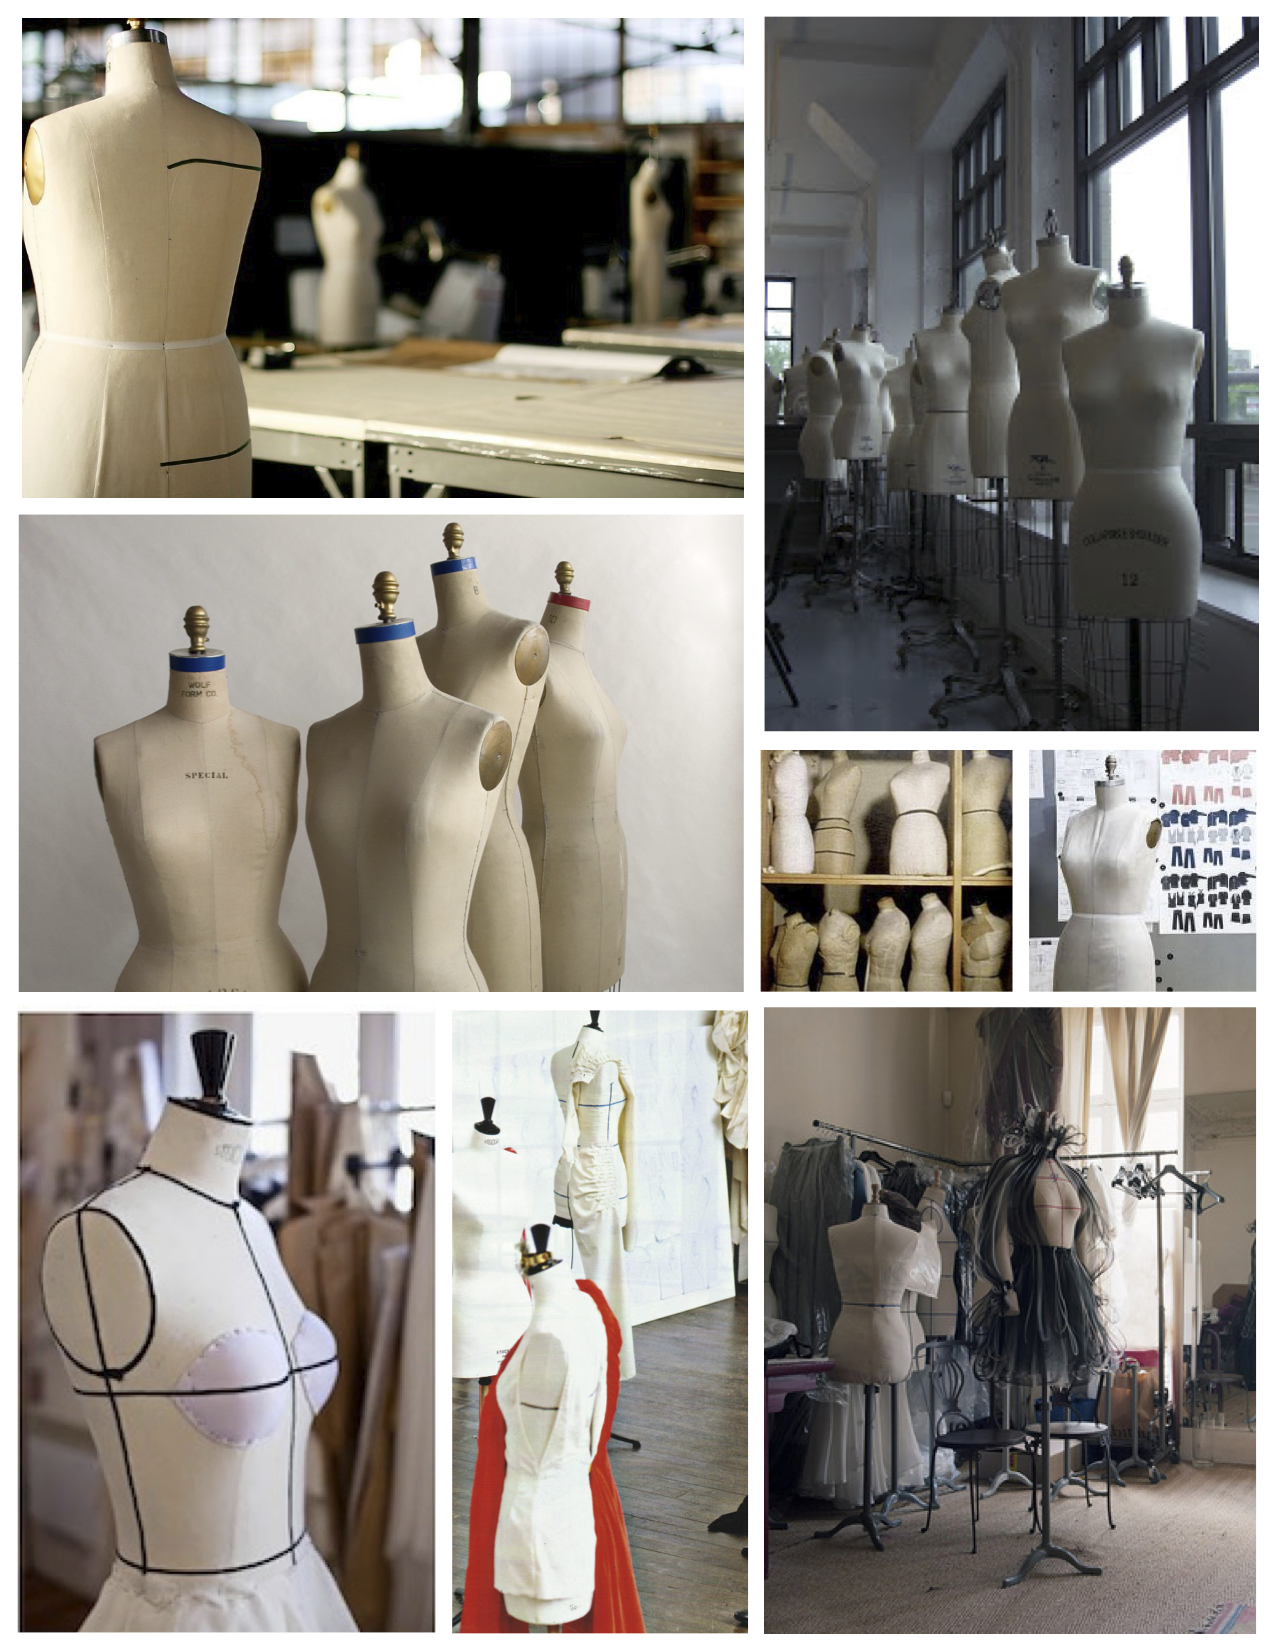 Fashion's Form & Function: Haute Couture's “Dress Form” & Its Embellishment  Within The Interior